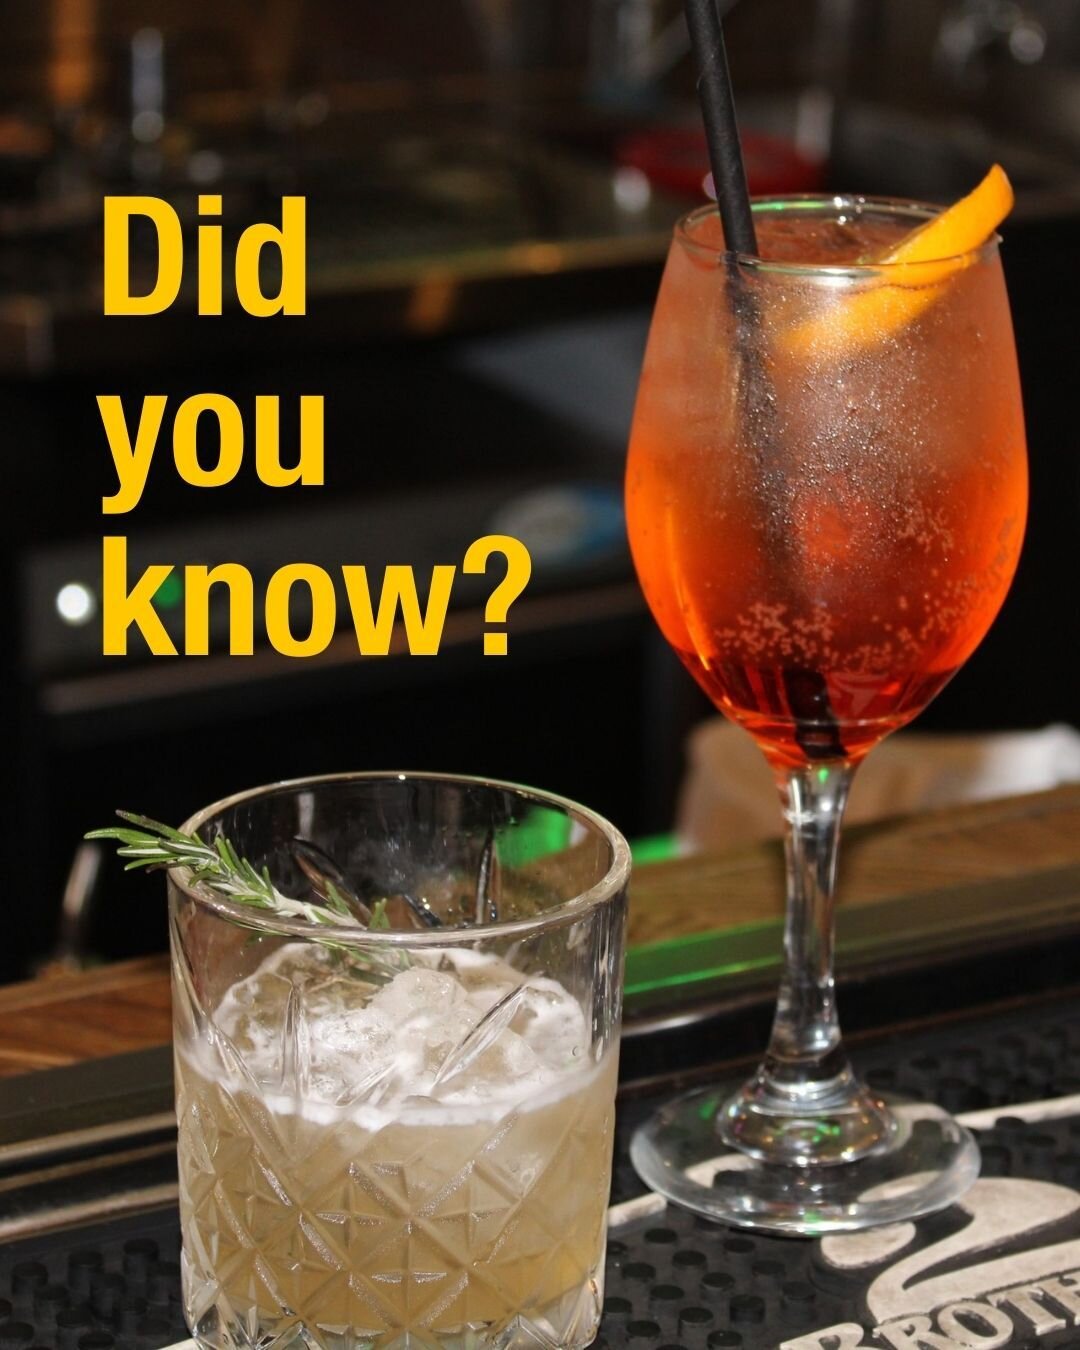 Did you know that every day between 5 pm &amp; 6:30 pm, our cocktails are only $16? 

#ventuno21 #bayside #SupportLocal #SupportSmallBusiness#ItalianFood #GoodFood #melbourne #cocktail #mocktail#pizza #pasta #wine #beer #blackrock #ComeSeeUs#NewMenu 